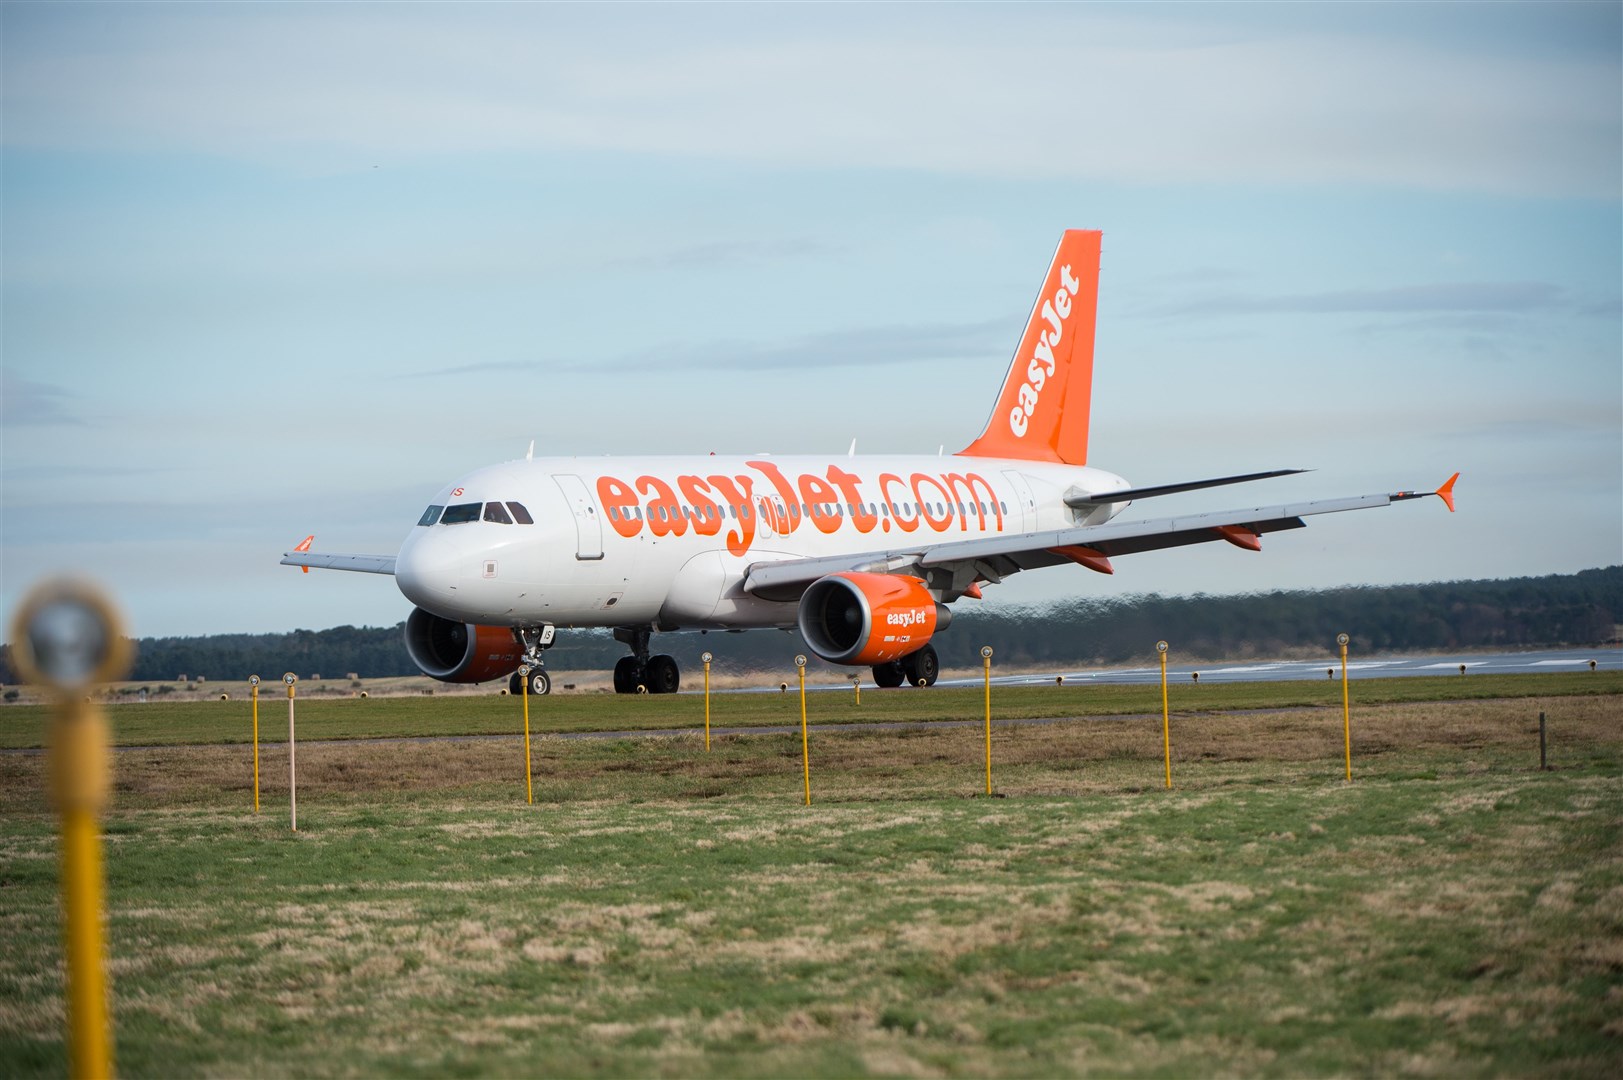 EasyJet has grounded its entire fleet in the wake of the coranvirus pandemic.